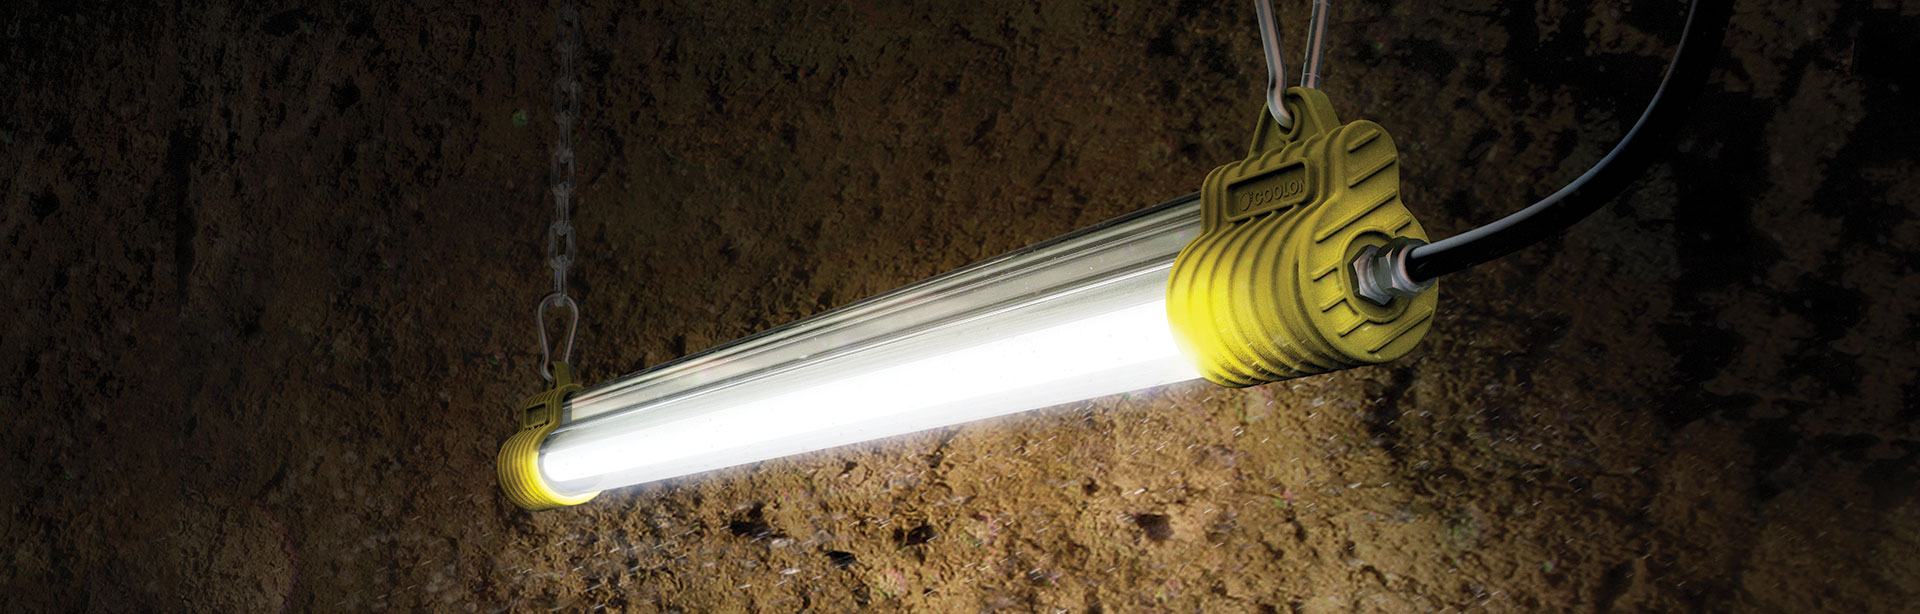 The AC2 LED mining light combines IP66 and IK09 impact ratings with support for a wide range of AC and DC voltages to make it a perfect replacement for commonly used low voltage fluorescent lead lights.